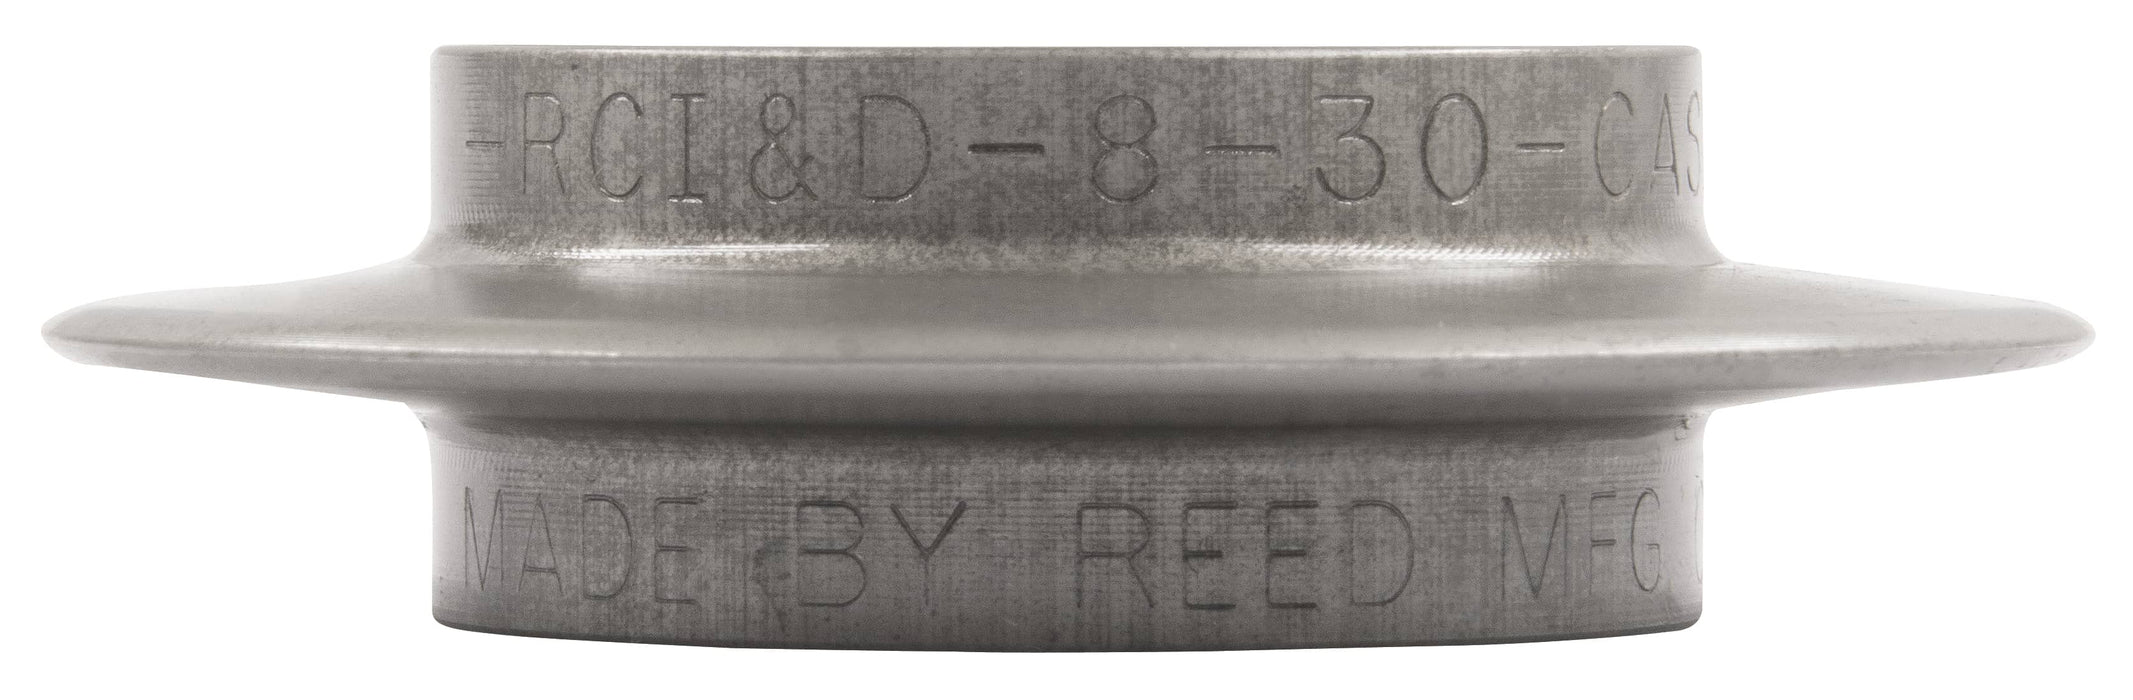 Reed Mfg RCI8-30 Cutter Wheel for Rotary™ Pipe Cutters, Cast Iron; Ductile Iron (manual) - Edmondson Supply